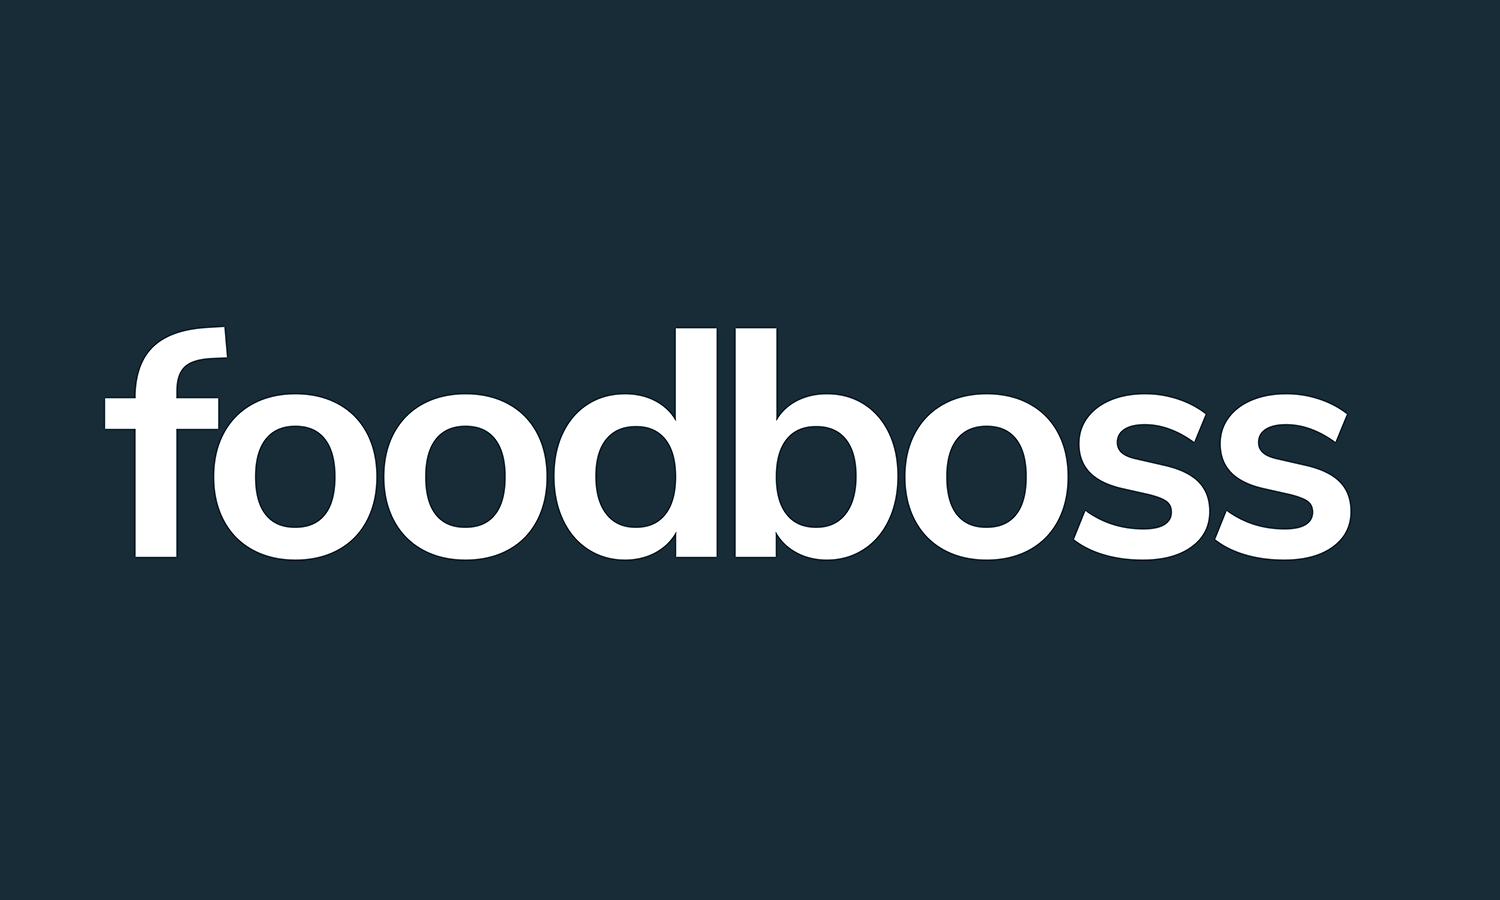 What is FoodBoss?